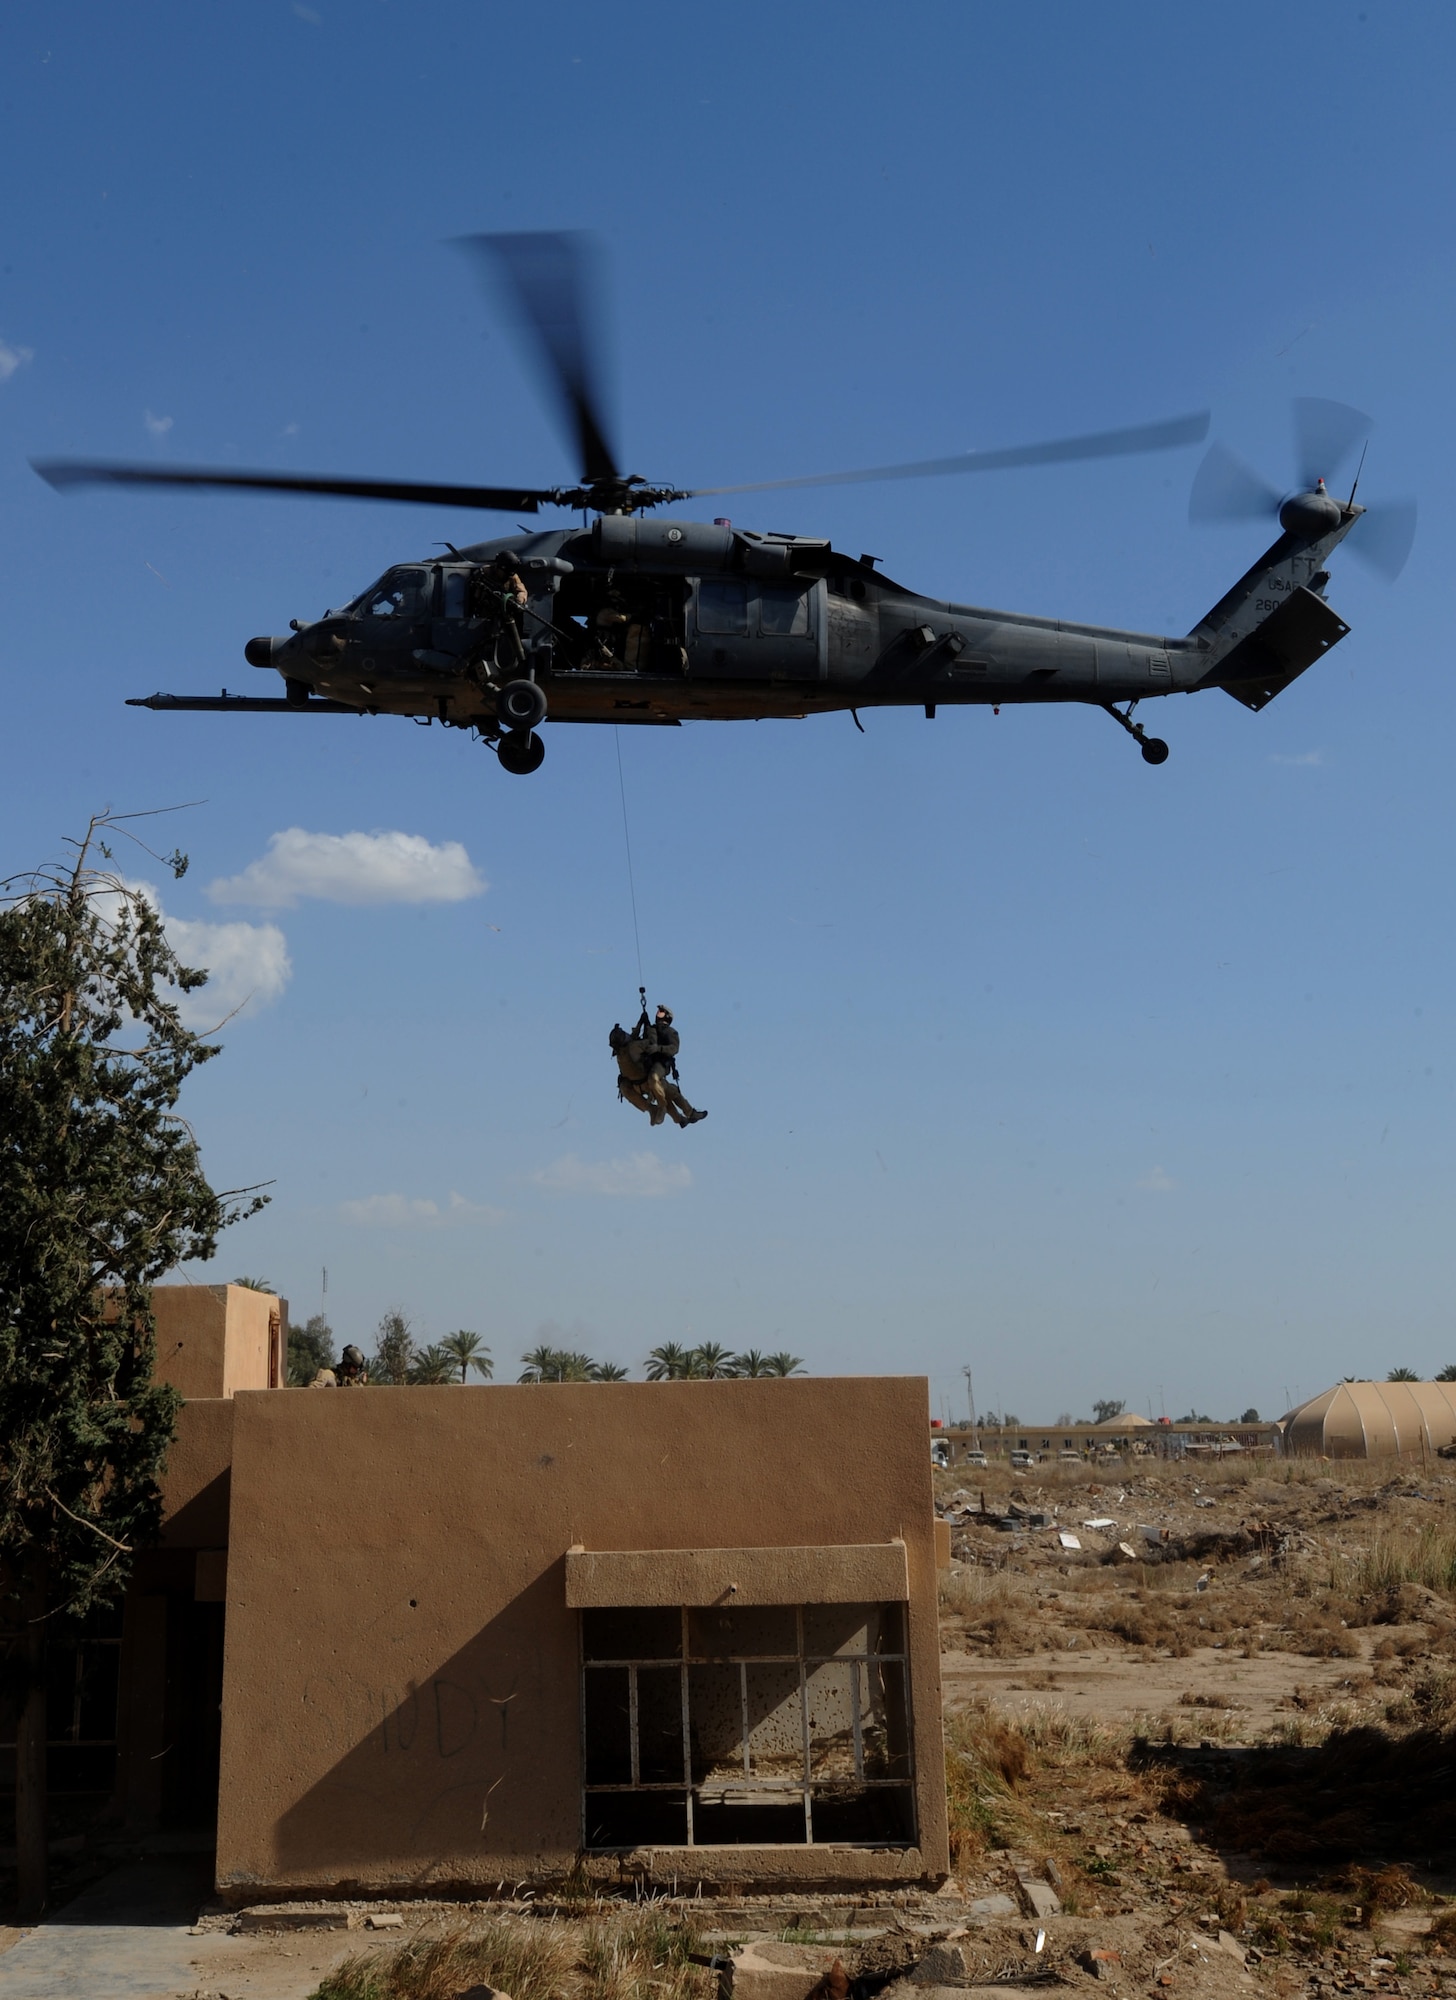 U.S. Air Force Pararescuemen from the 64th Expeditionary Rescue Squadron, Joint Base Balad, Iraq, are hoisted to an HH-60 Pavehawk helicopter outside of Baghdad, Iraq during a proficiency exercise April 10, 2009, in support of Operation Iraqi Freedom.  (U.S. Air Force photo by Staff Sgt. James L. Harper Jr.)